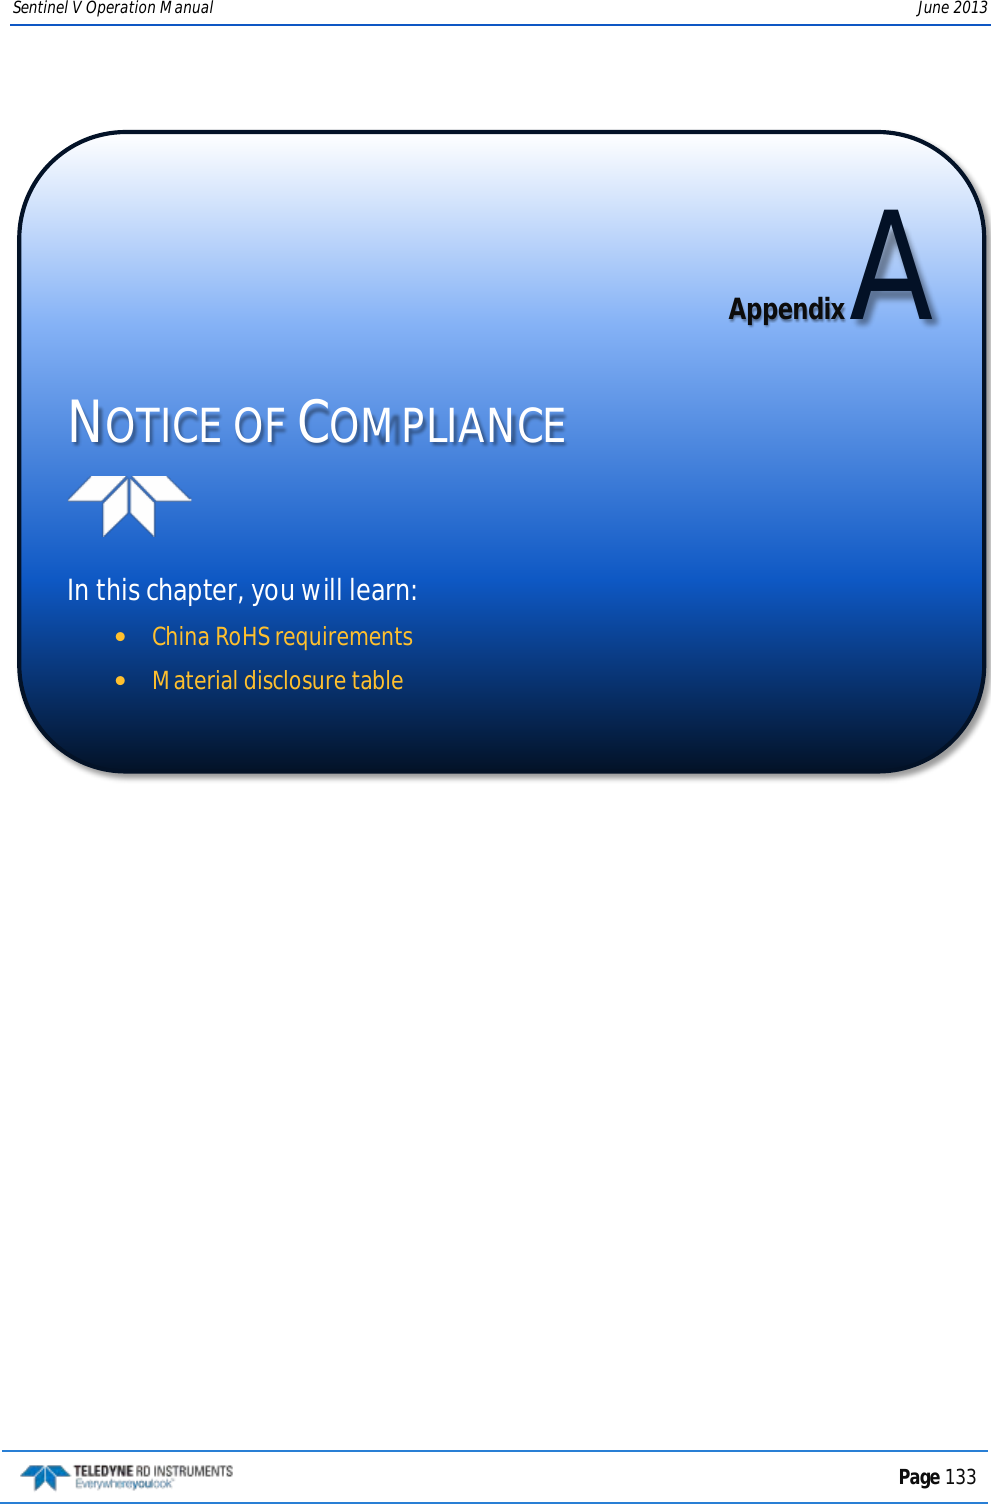 Sentinel V Operation Manual June 2013     Appendix A NOTICE OF COMPLIANCE   In this chapter, you will learn: •China RoHS requirements •Material disclosure table   Page 133  